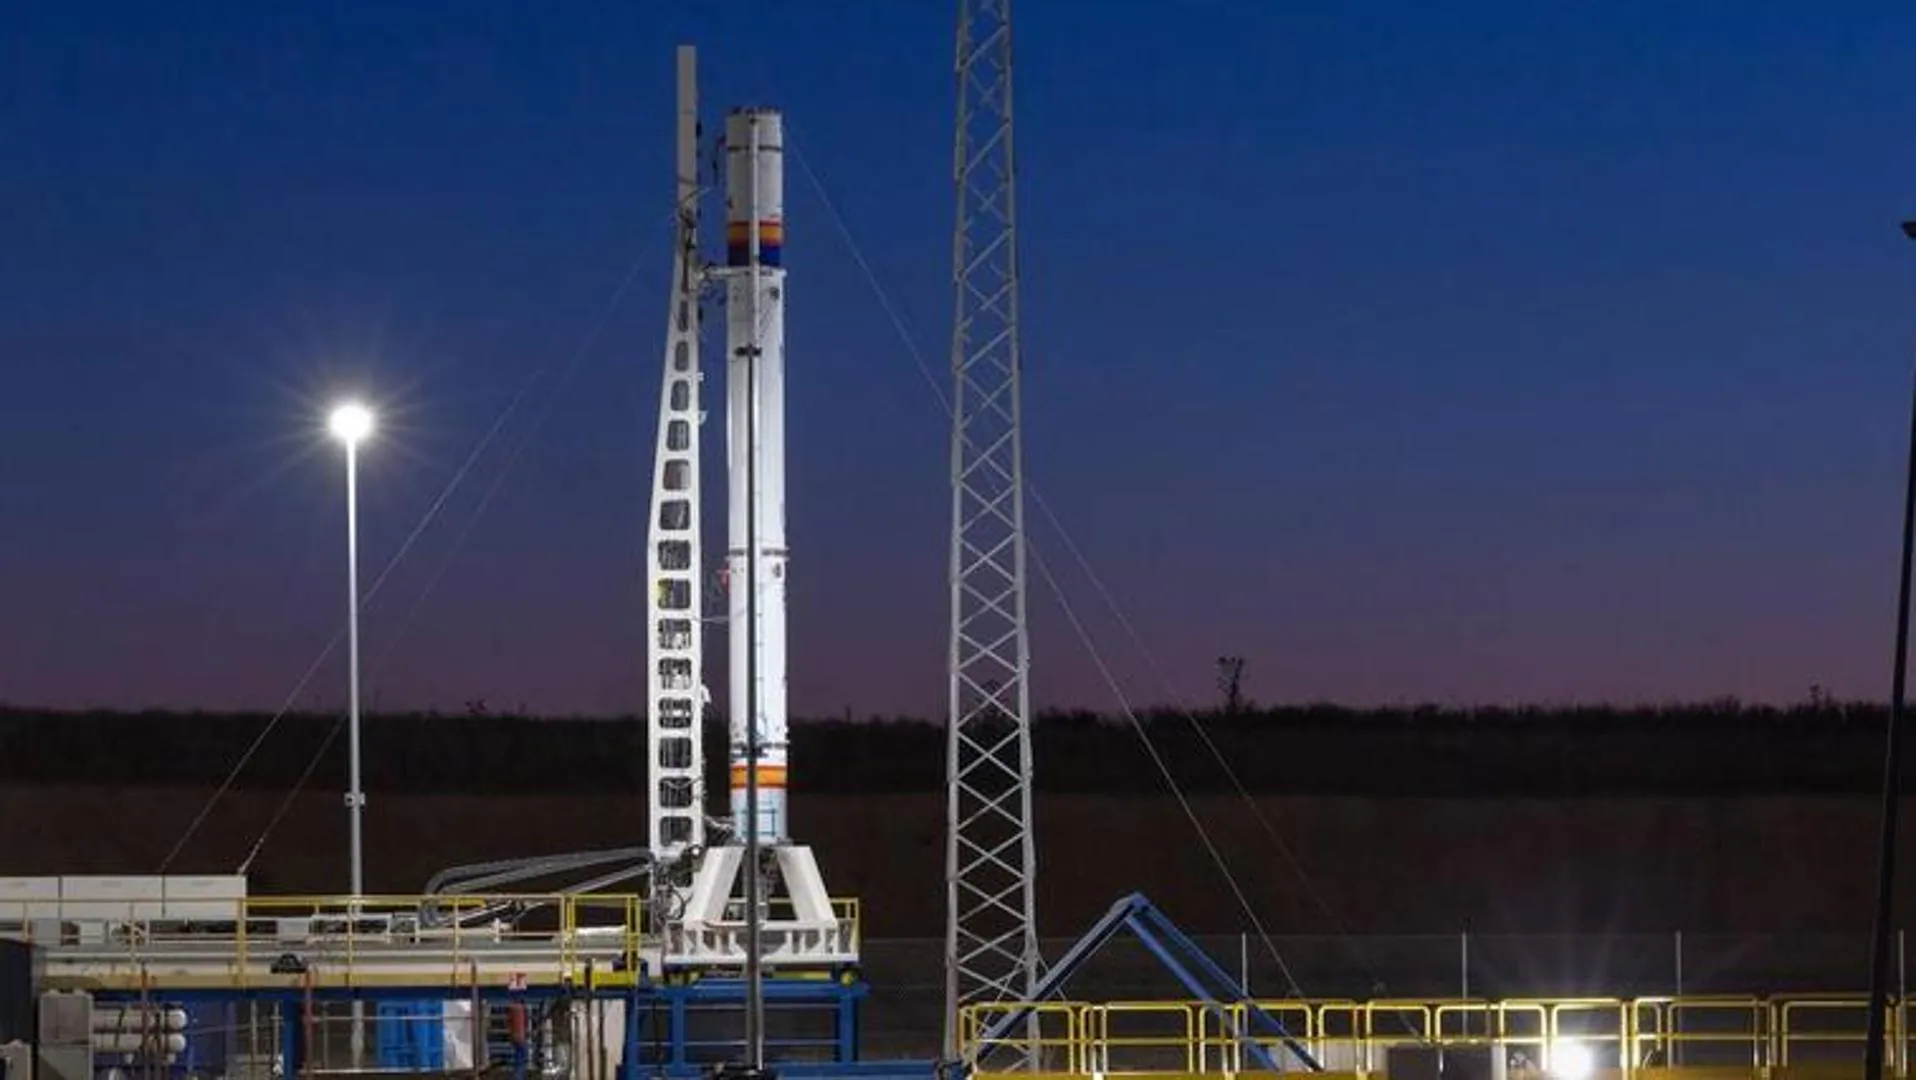 Everything ready for the launch of the Miura 1, the first reusable Spanish rocket